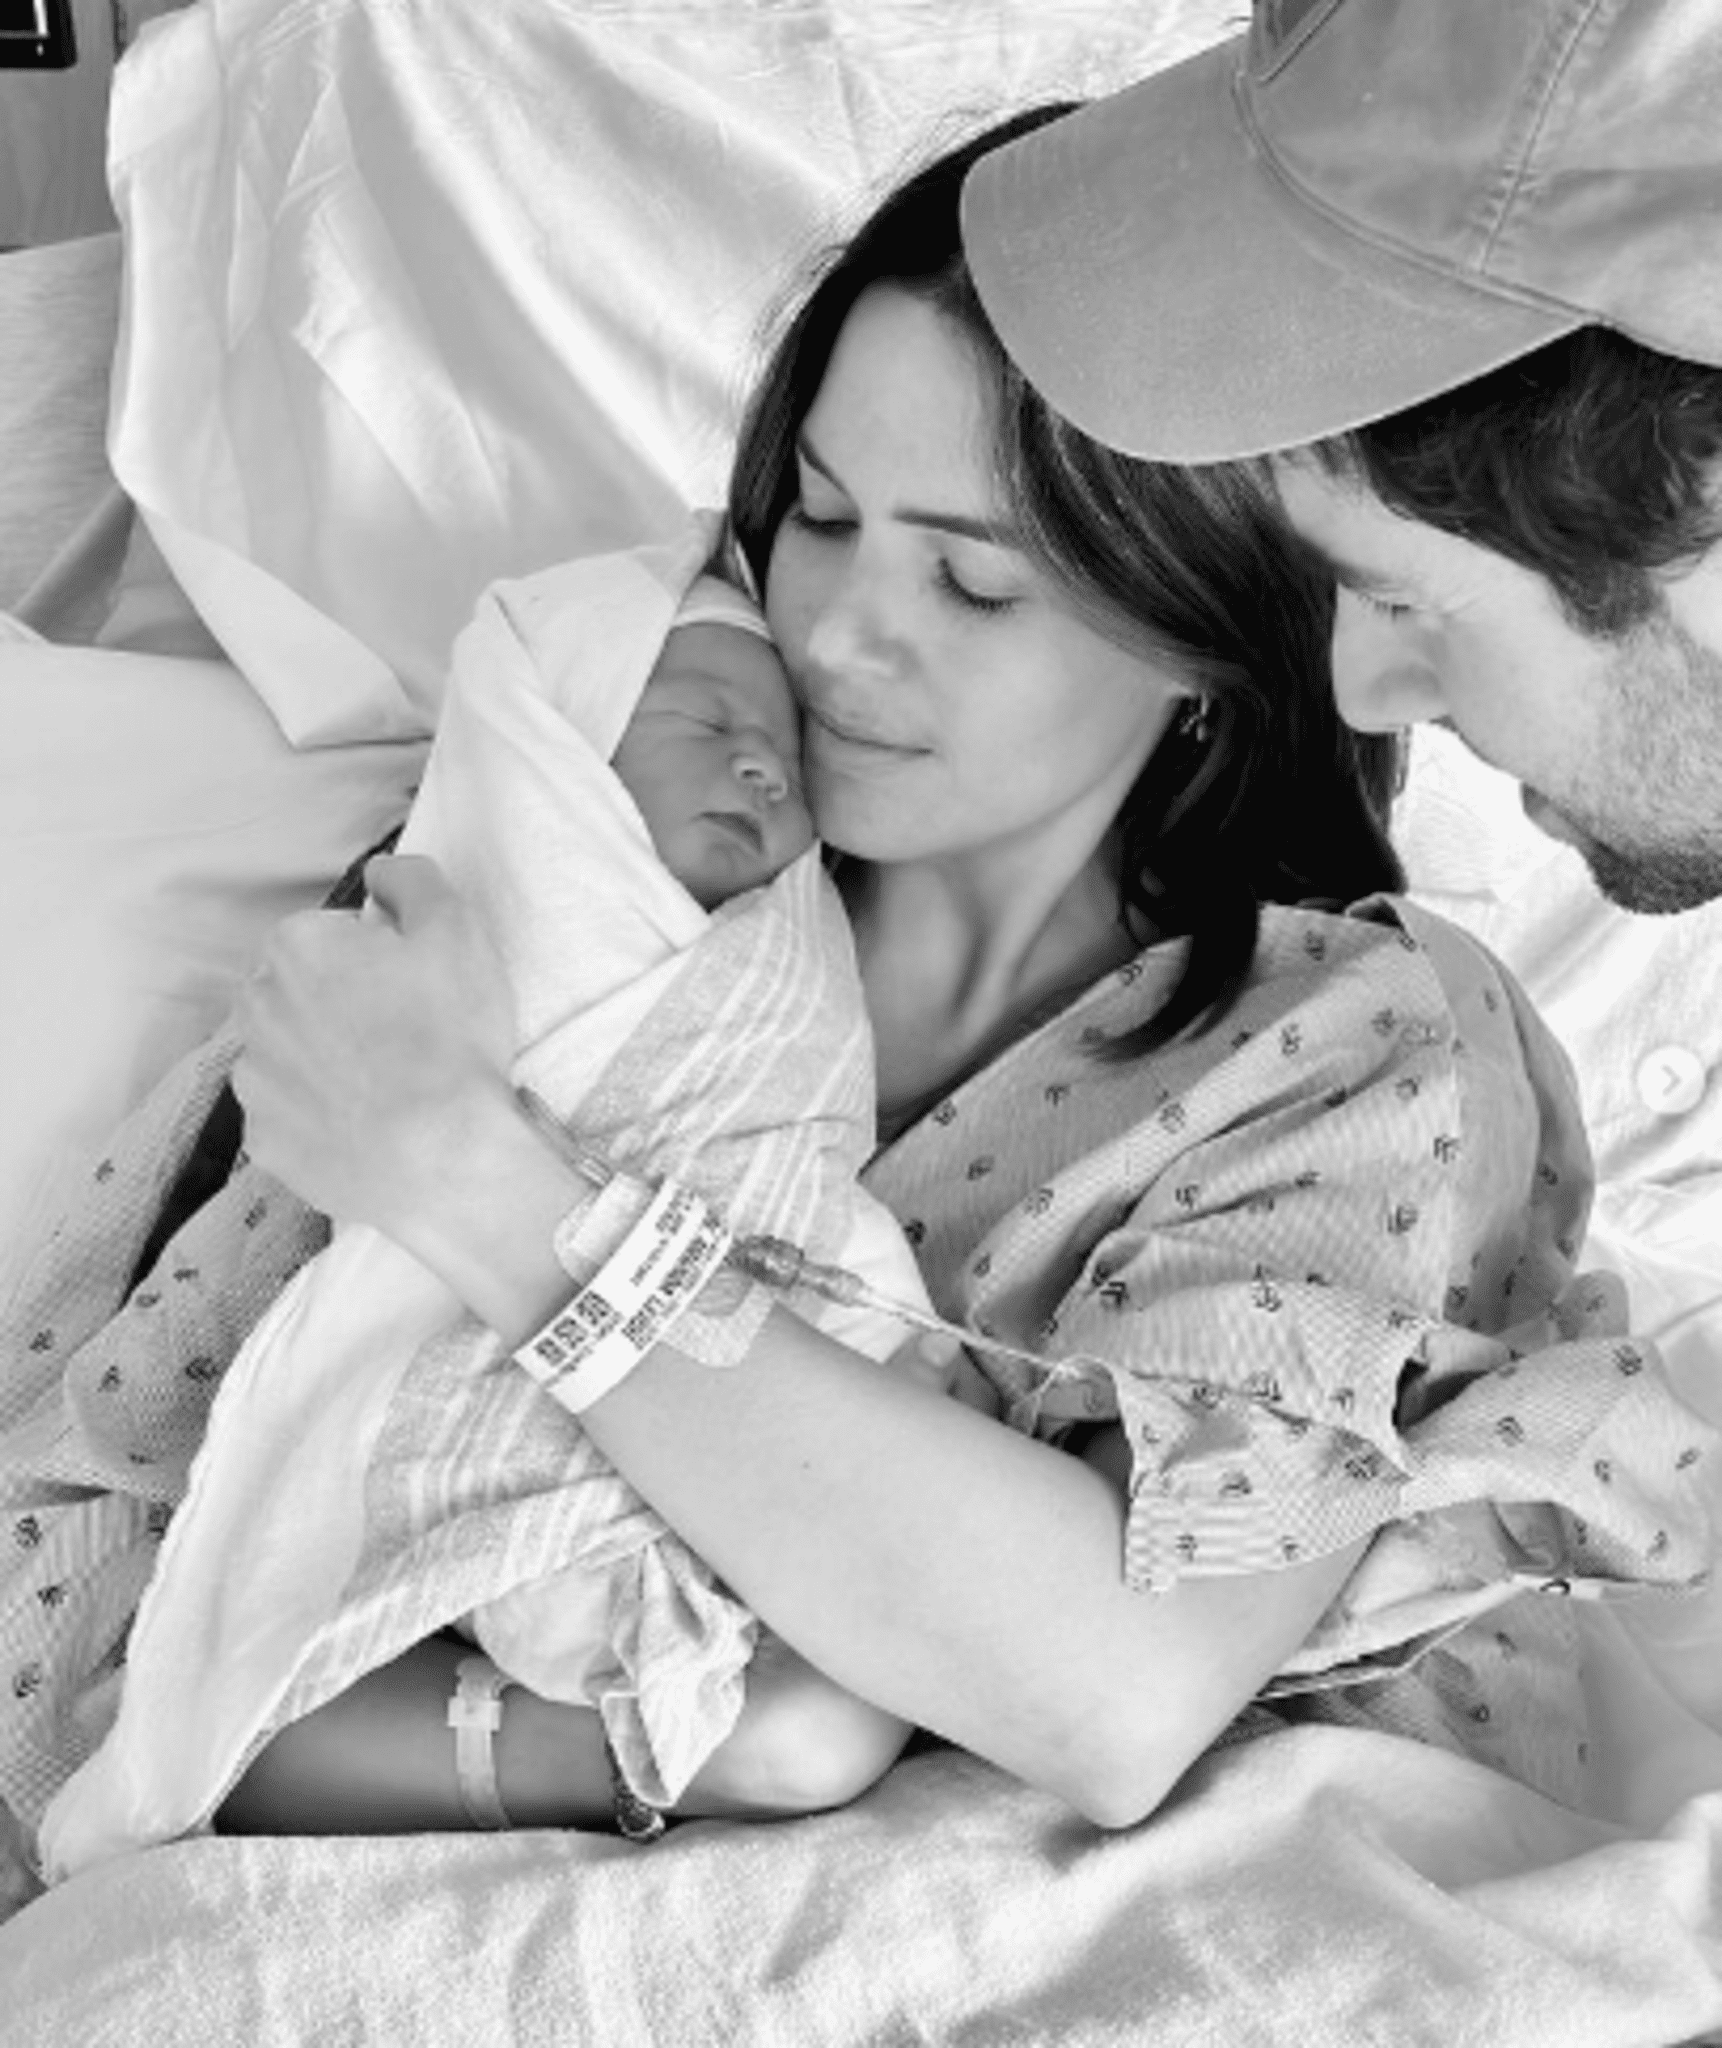 The second son of Mandy Moore and Taylor Goldsmith has finally arrived.